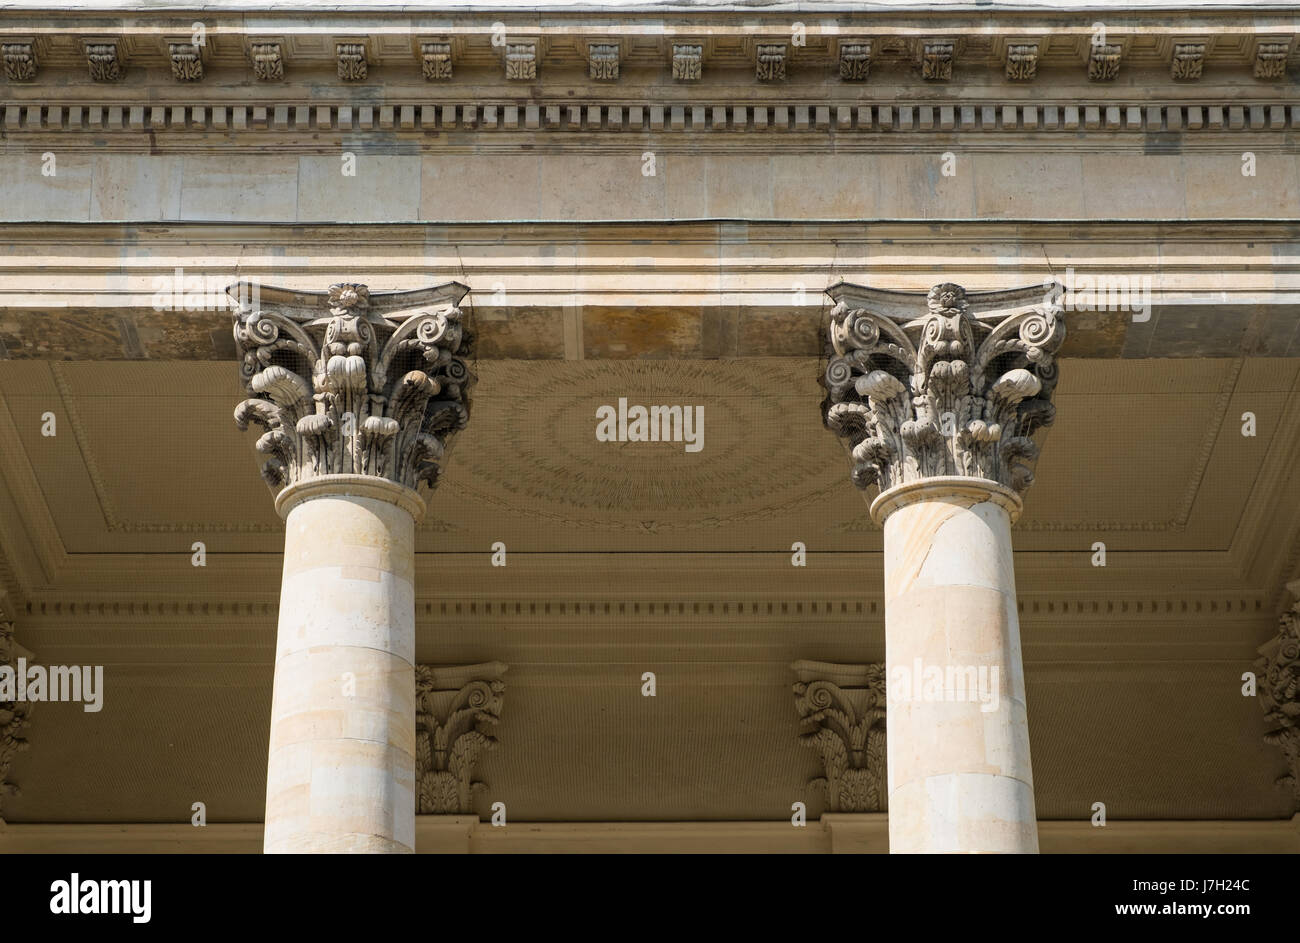 Two pillars / columns and capitals on historic architecture Stock Photo